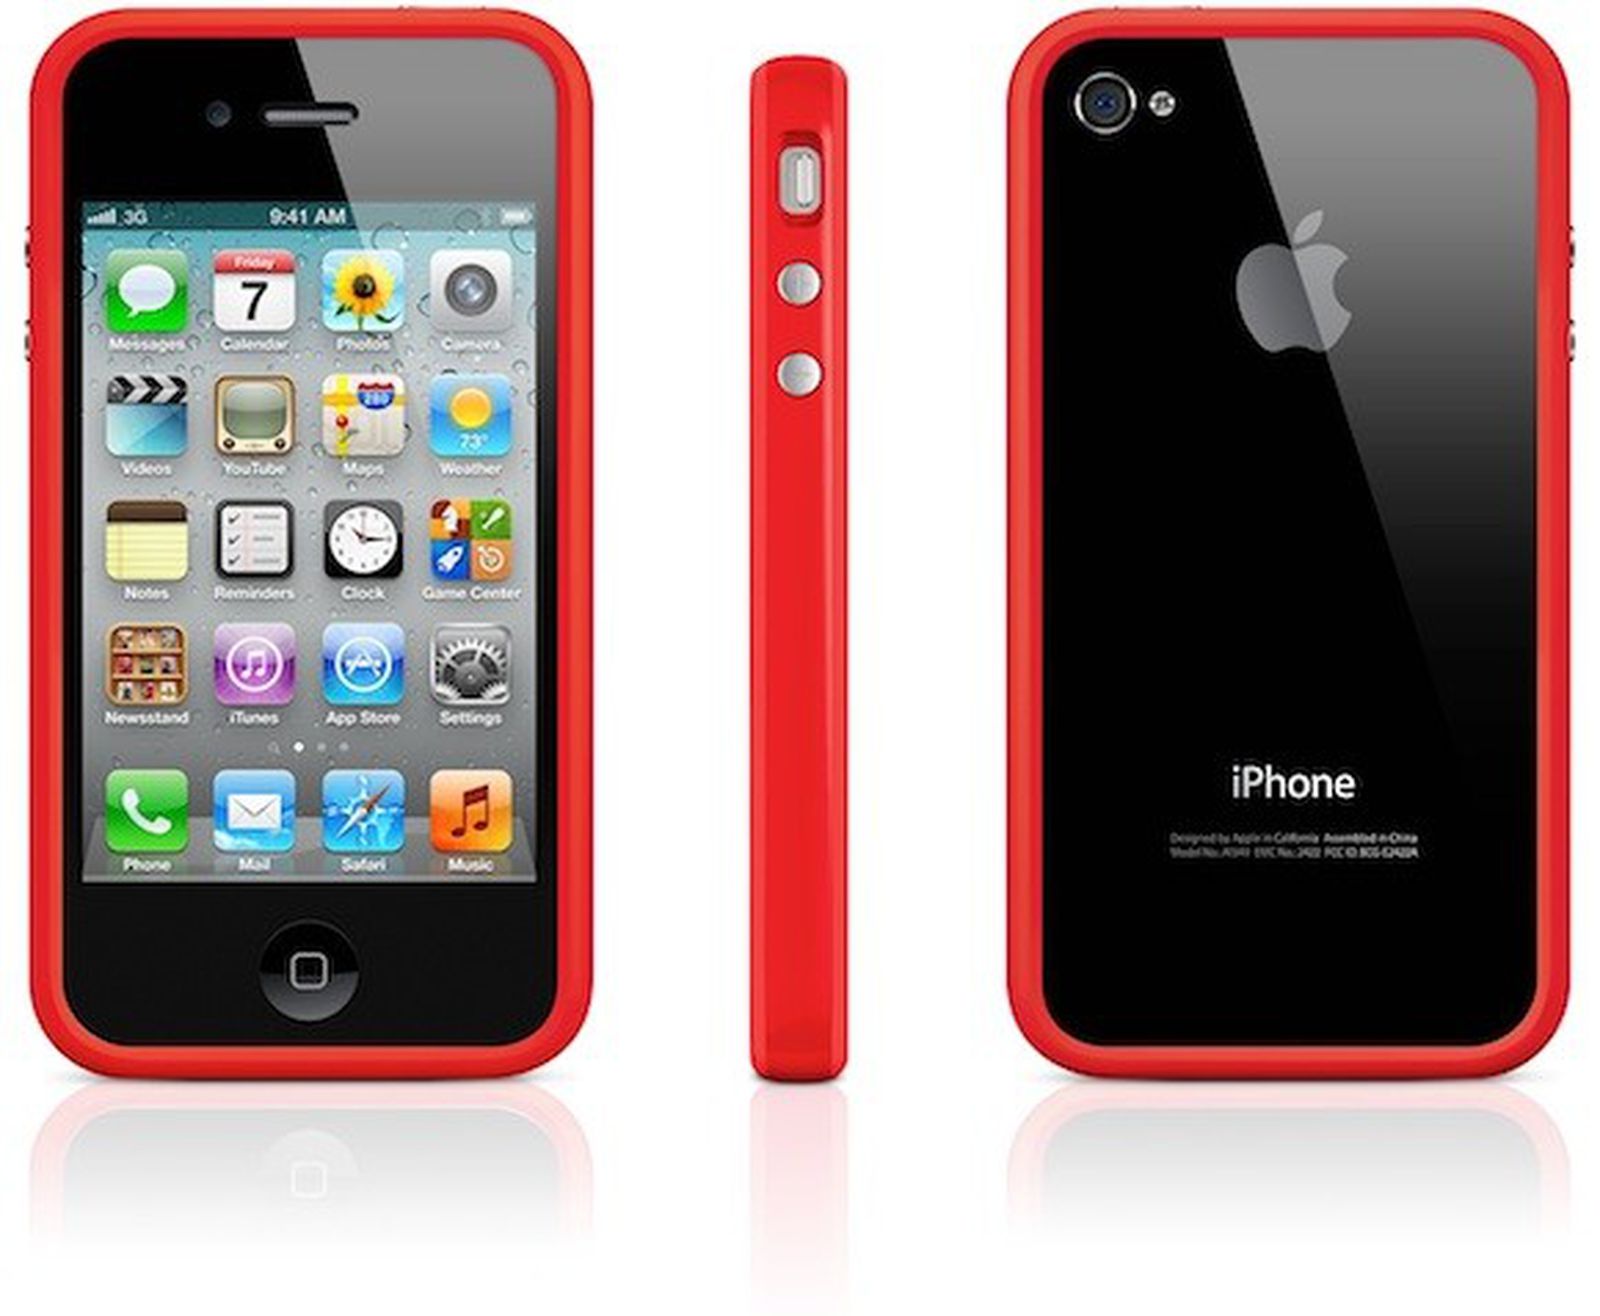 Kinderdag cabine ondanks Apple Releases (PRODUCT) RED Bumper for iPhone 4S/4 - MacRumors